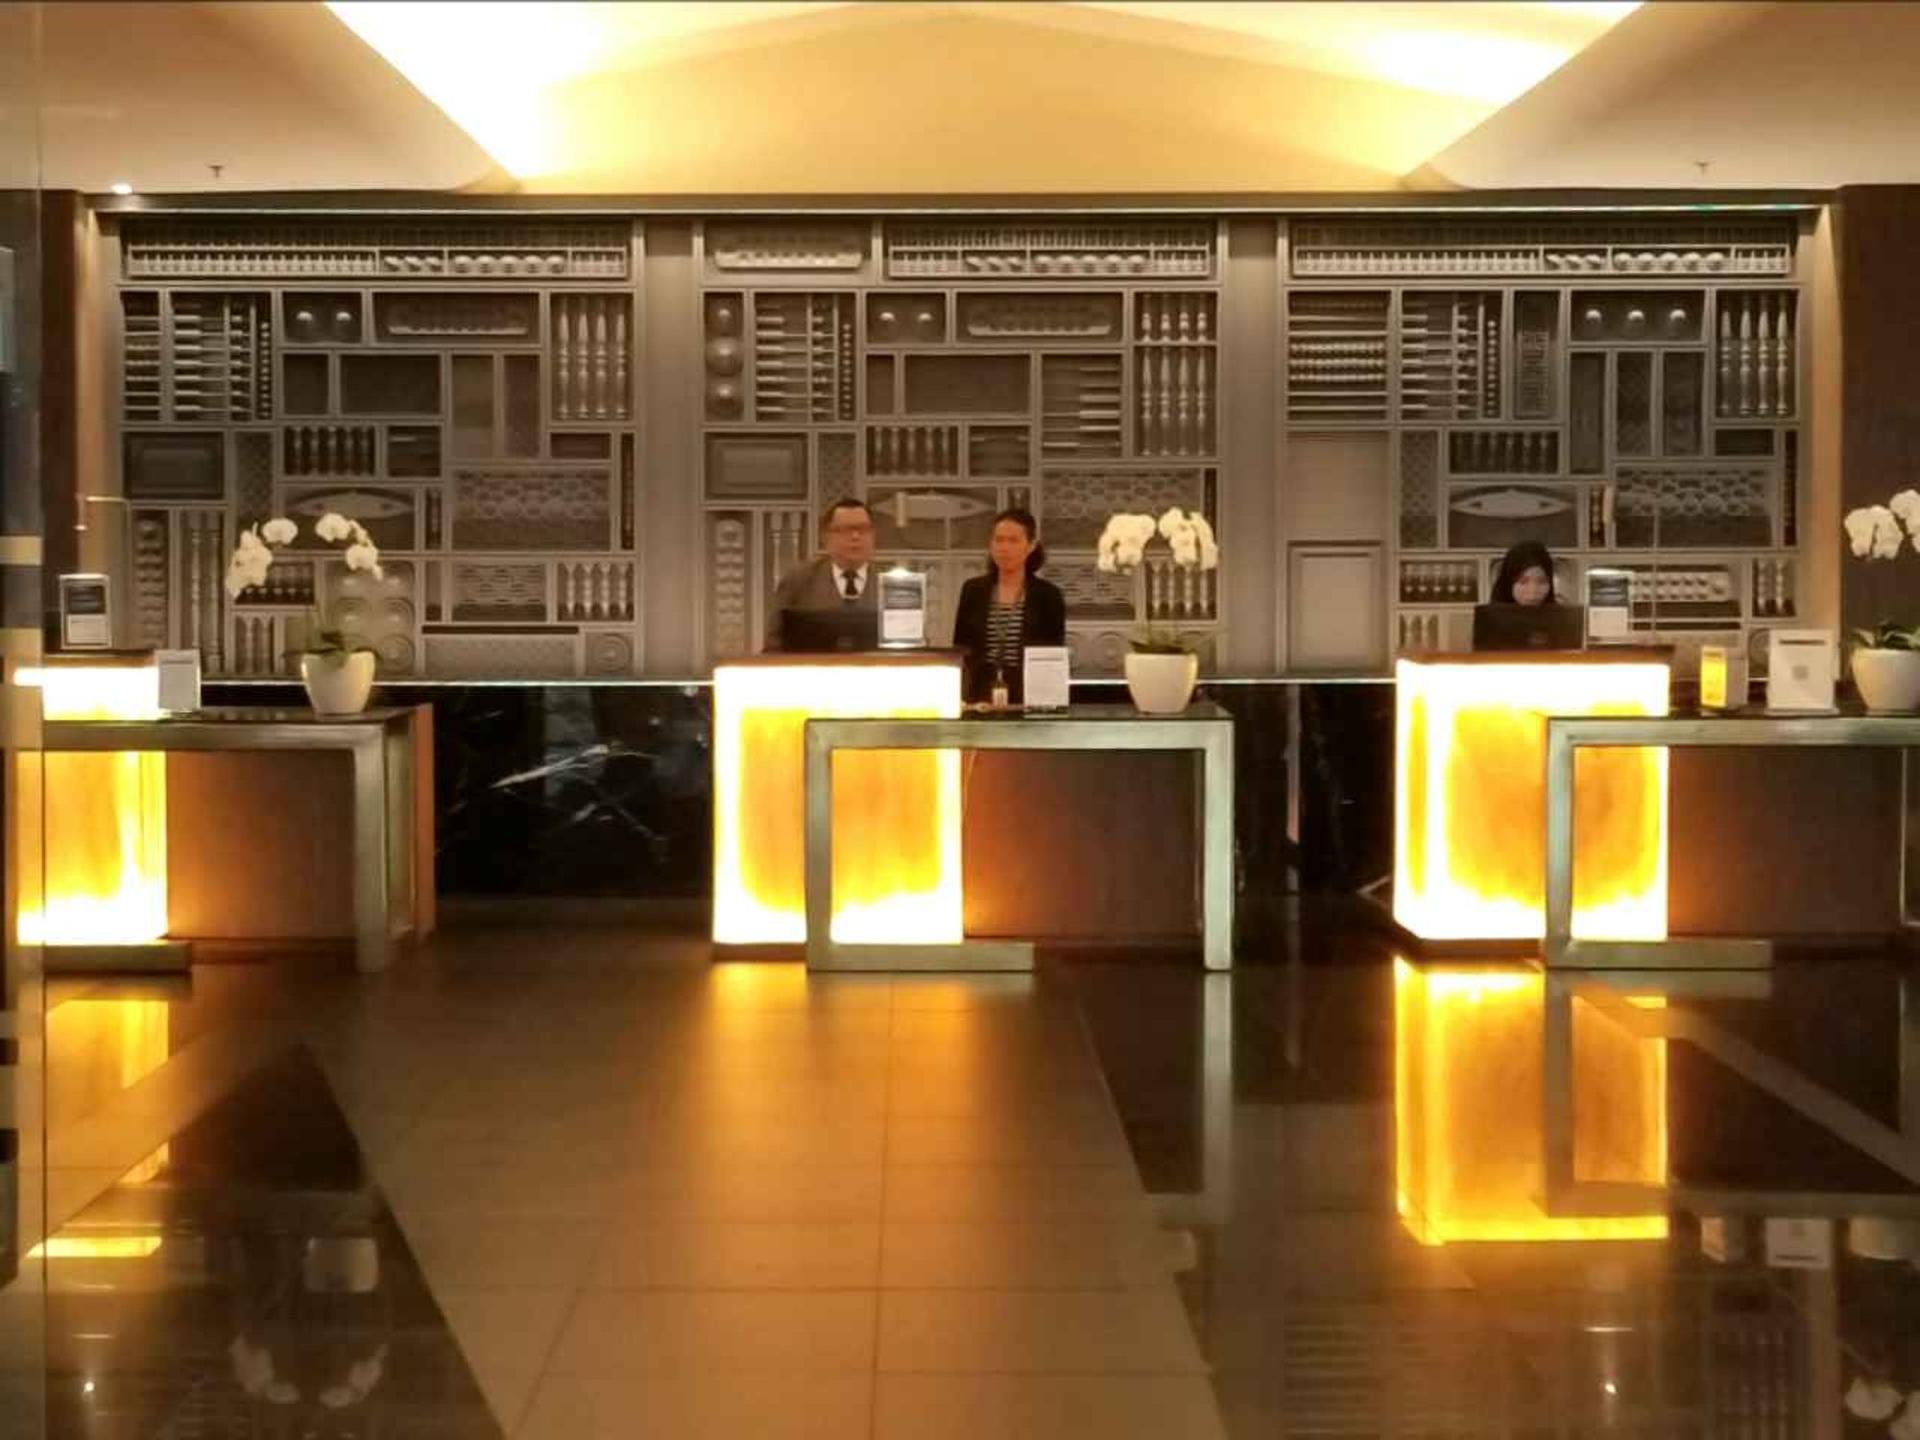 Malaysia Airlines Platinum Lounge image 10 of 26